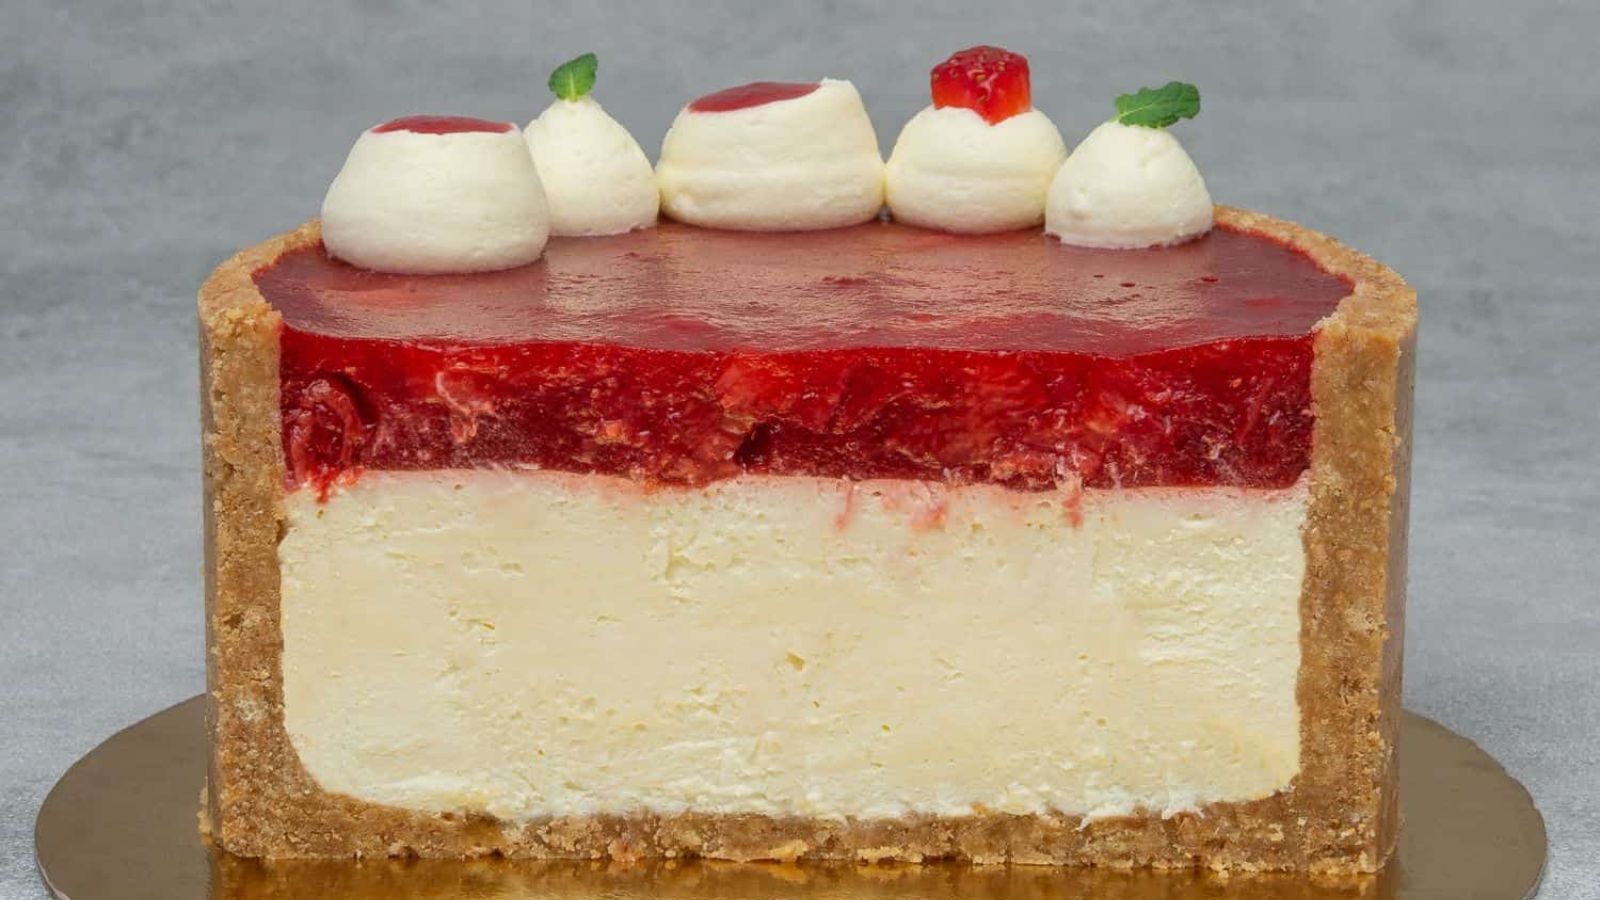 Surprise Your Easter Guests with 18 Amazing Last-Minute No-Bake Desserts